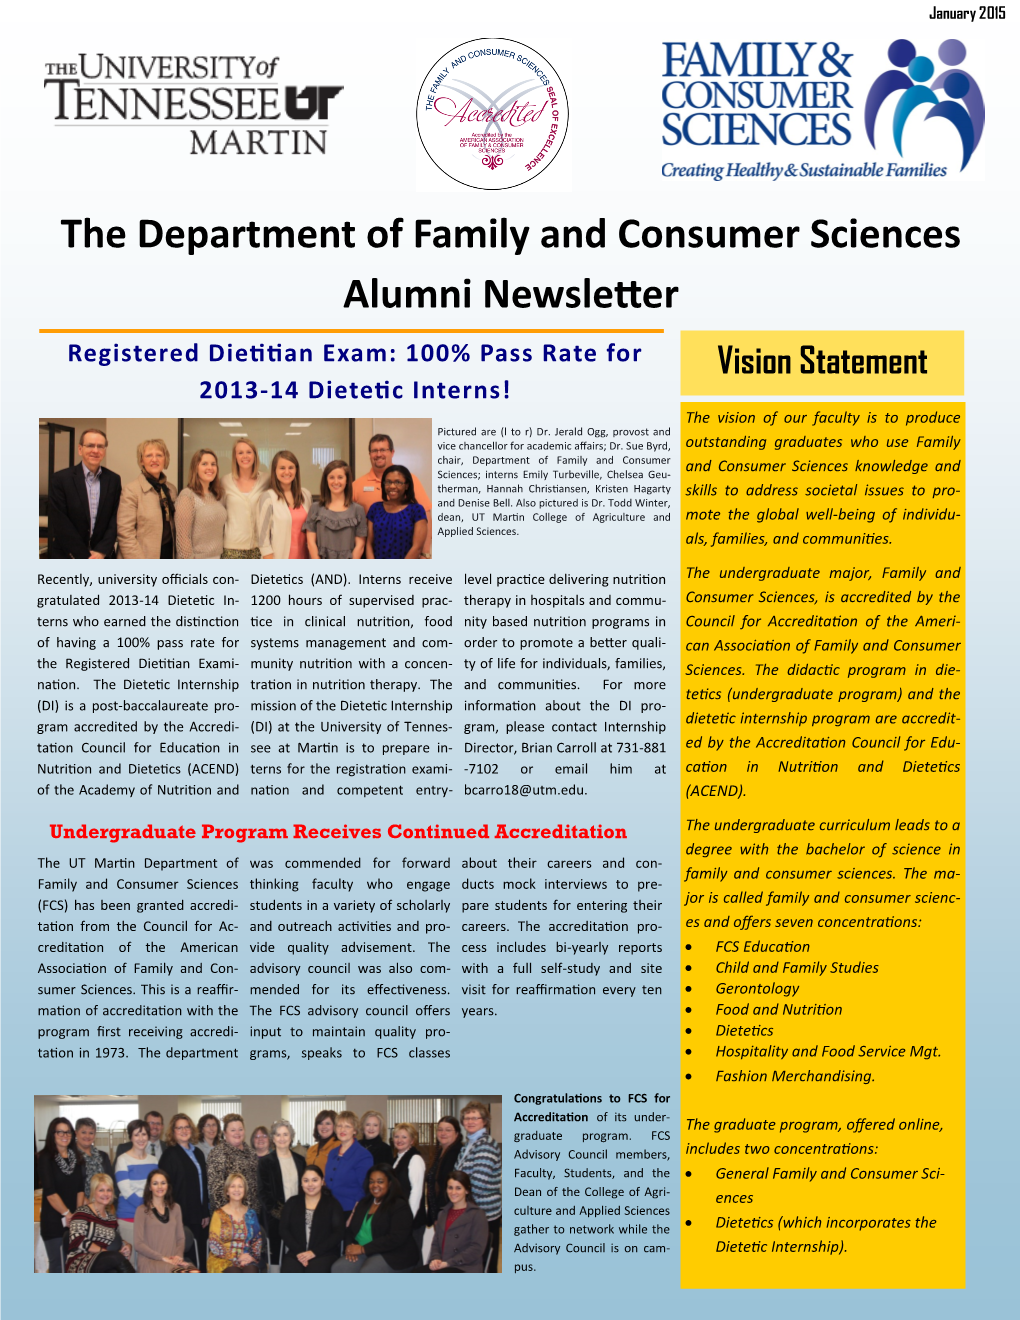 Family and Consumer Sciences Newsletter January